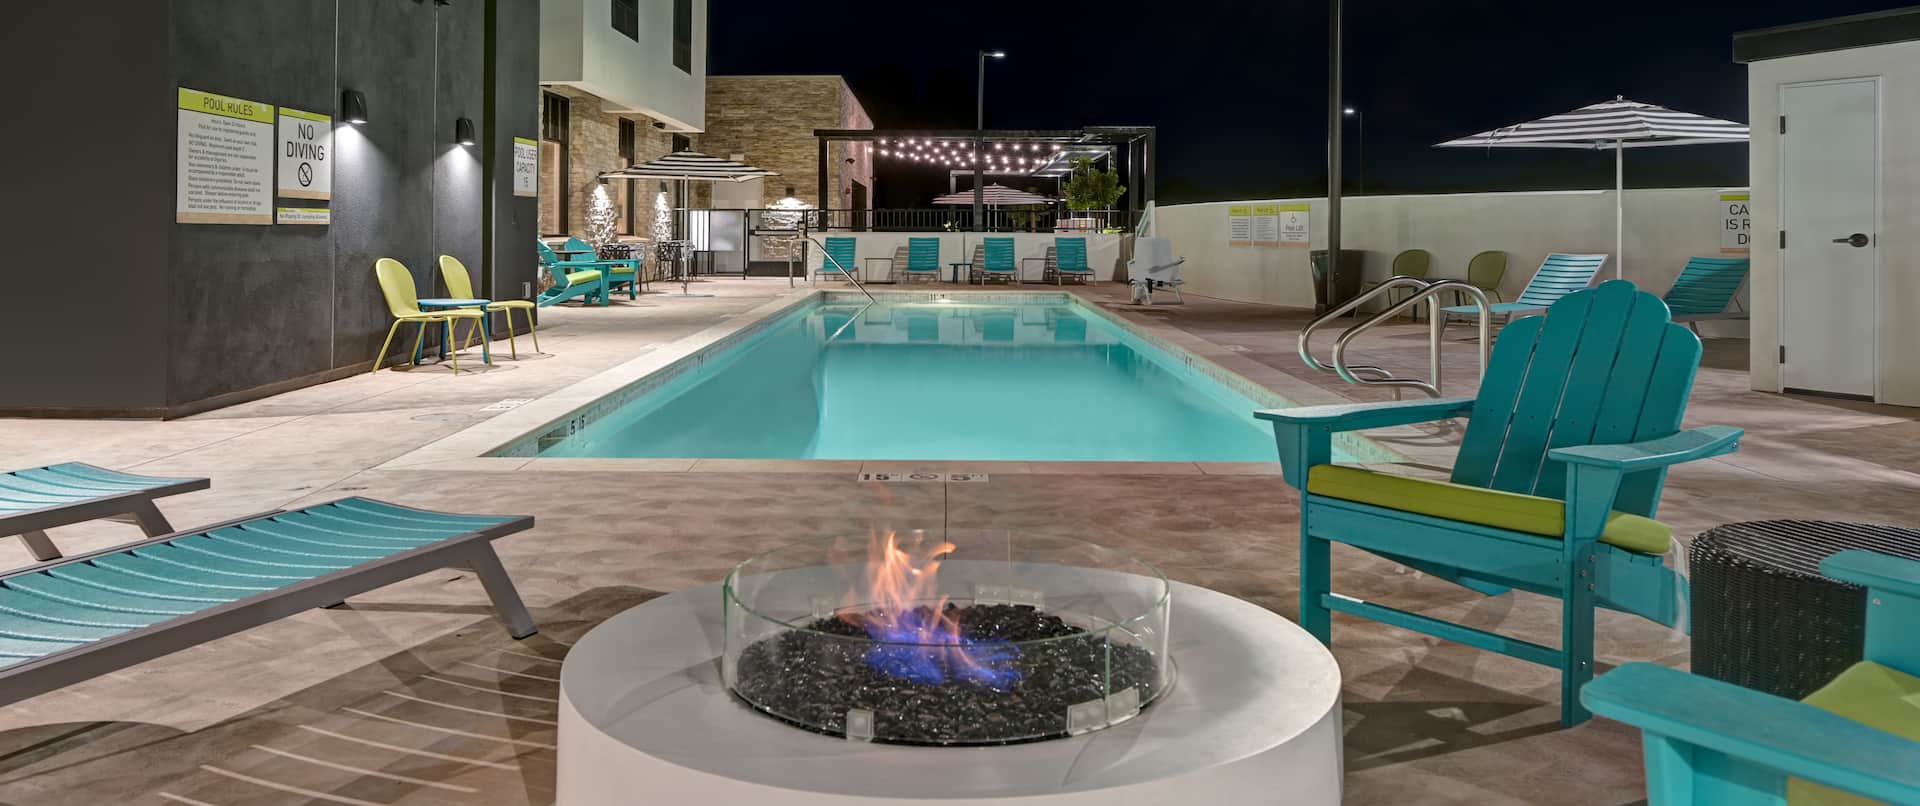 outdoor pool outdoor seating and fire pit